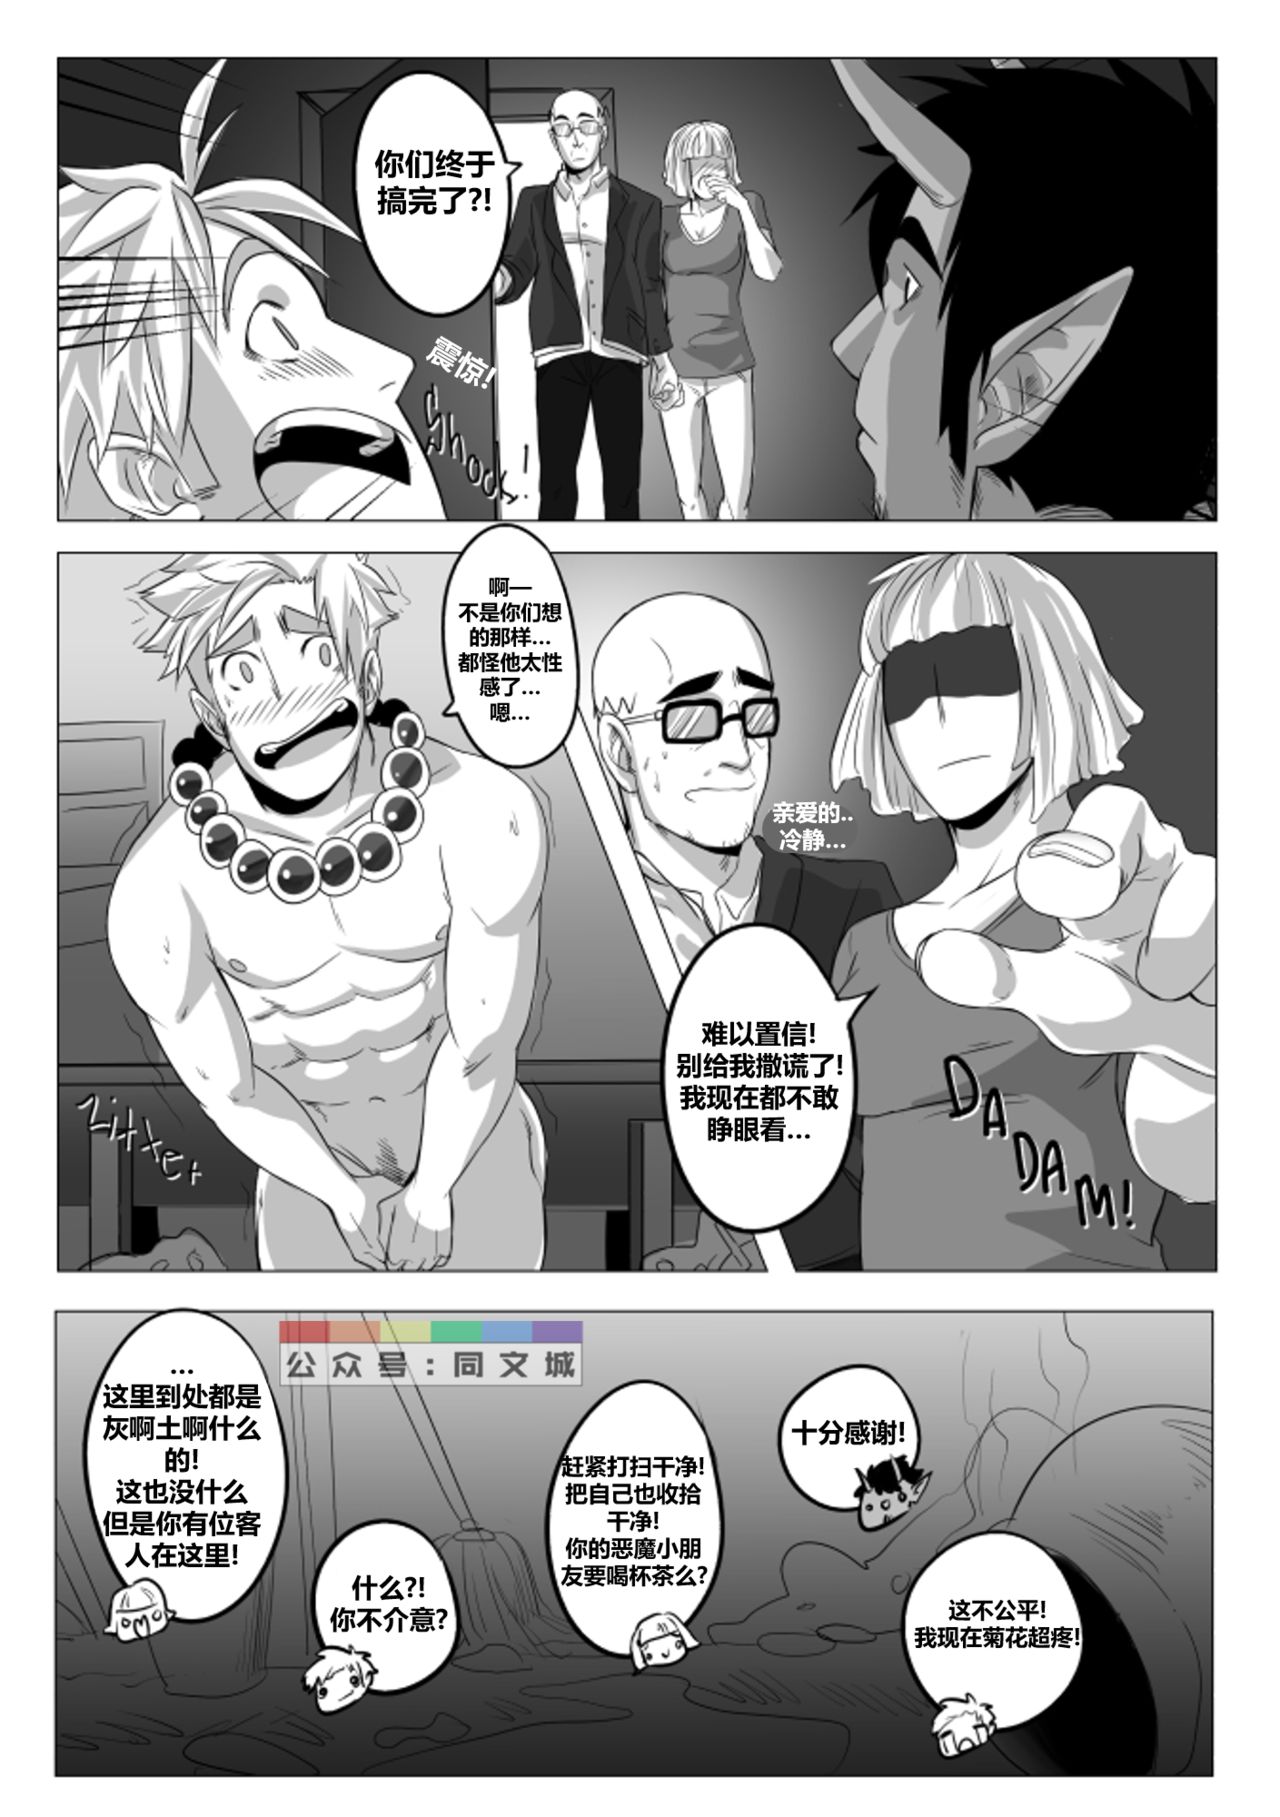 Jasdavi – Keep it Clean!（Chinese） page 15 full